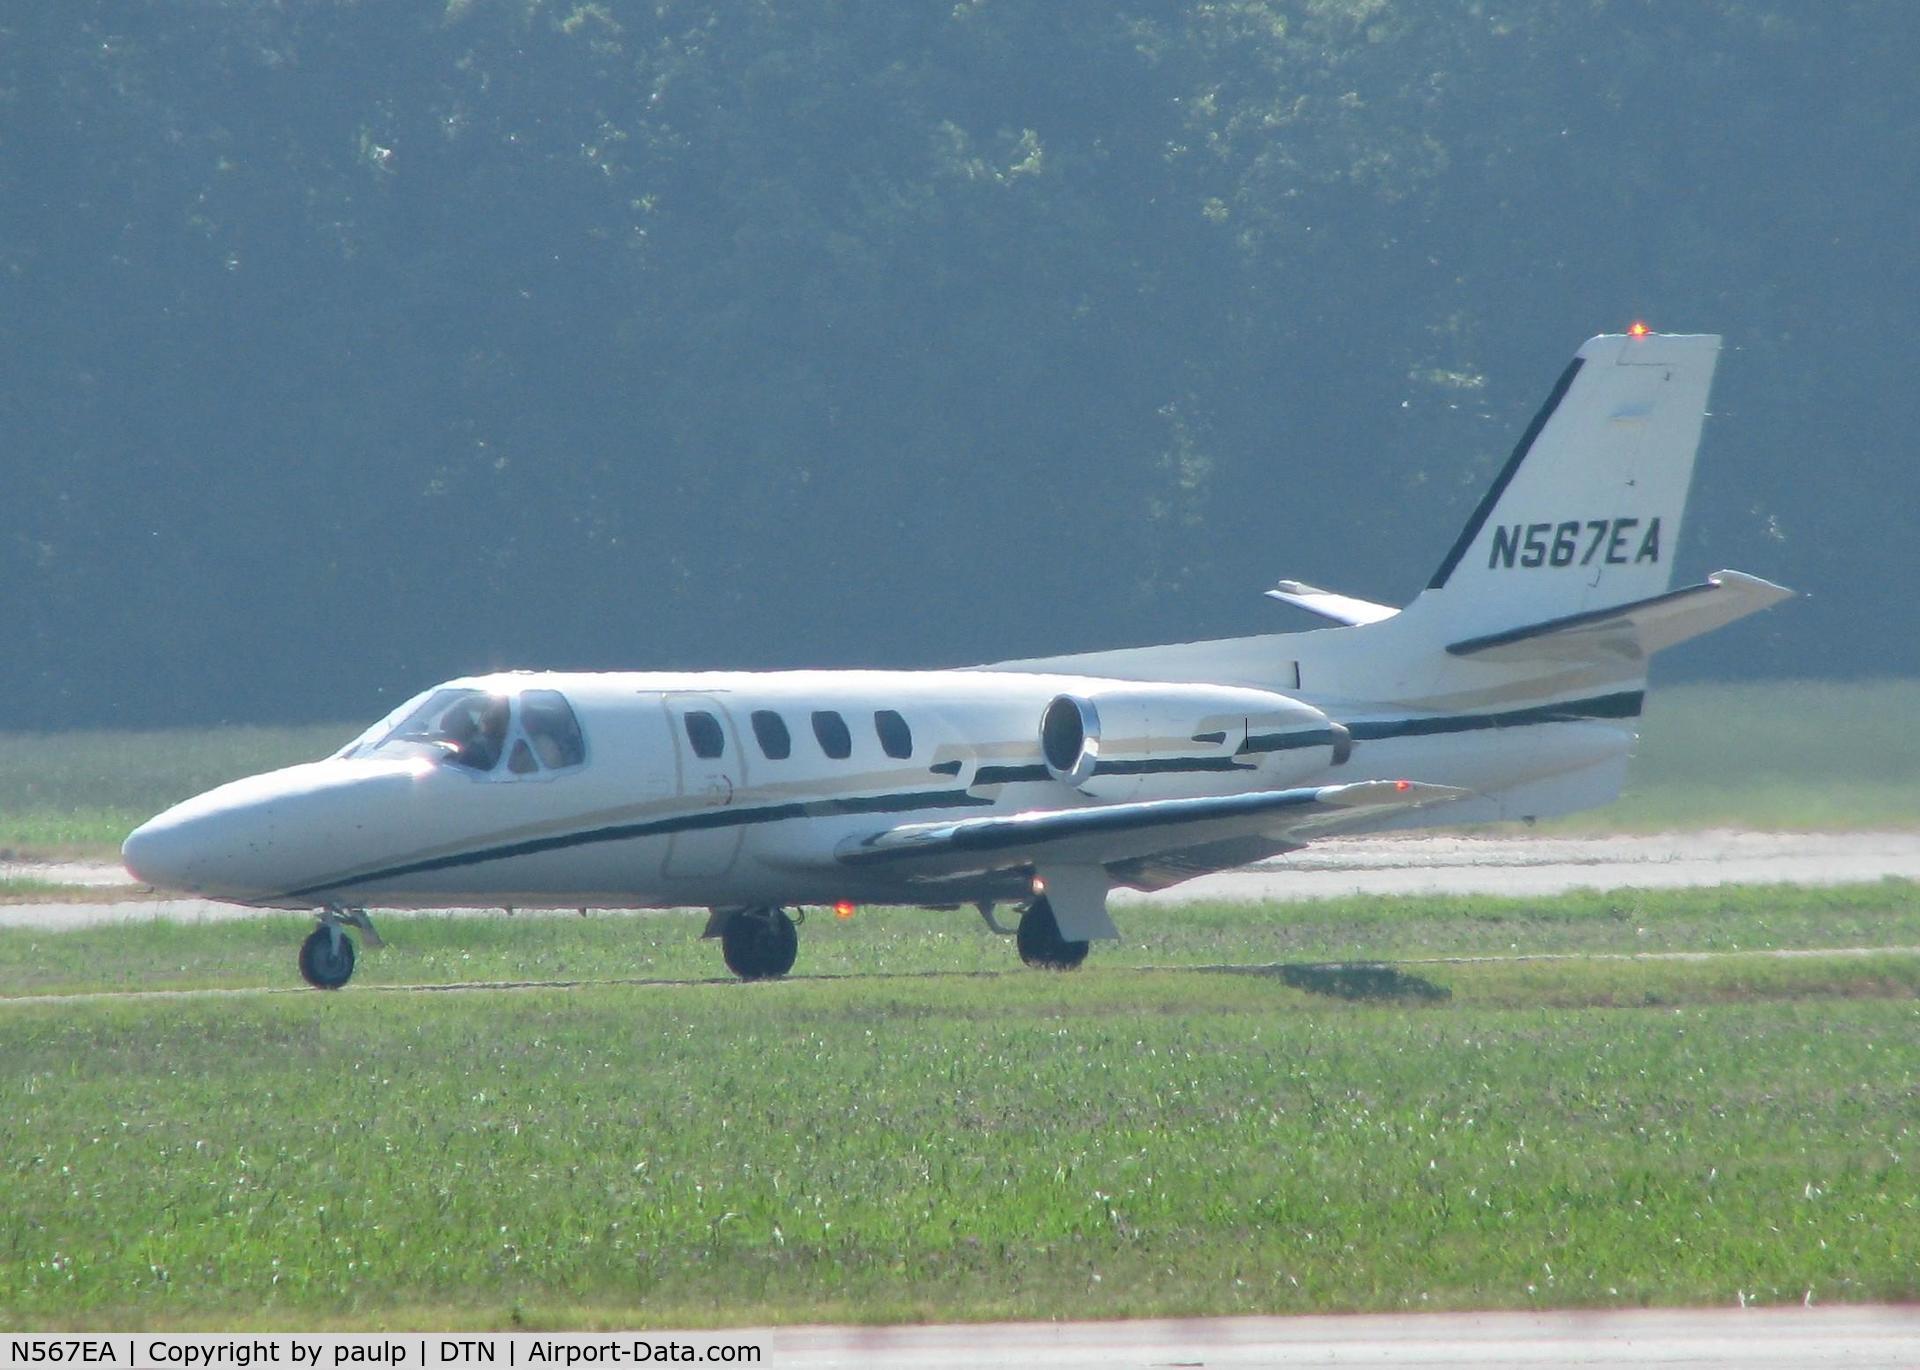 N567EA, 1973 Cessna 500 C/N 500-0067, Taxiing in after landing at Downtown Shreveport.